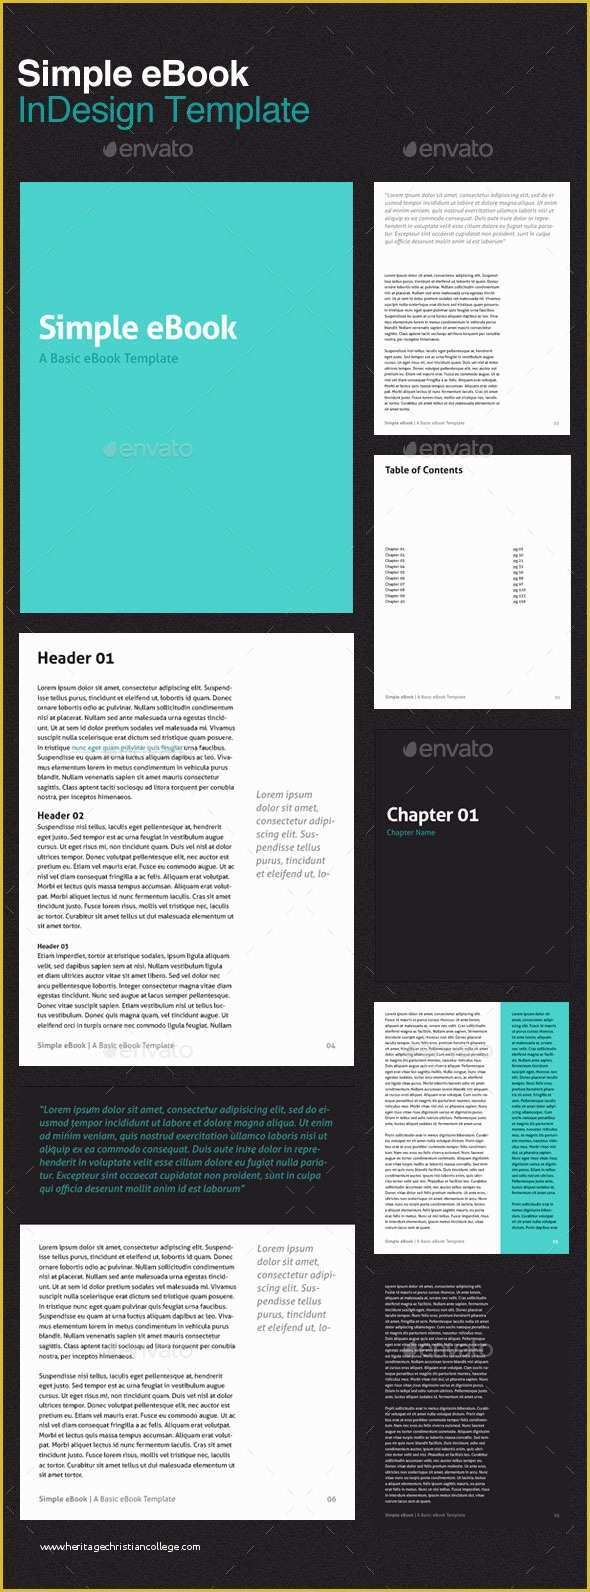 Ebook Templates Free Download Of Simple Ebook Template by Cardeo